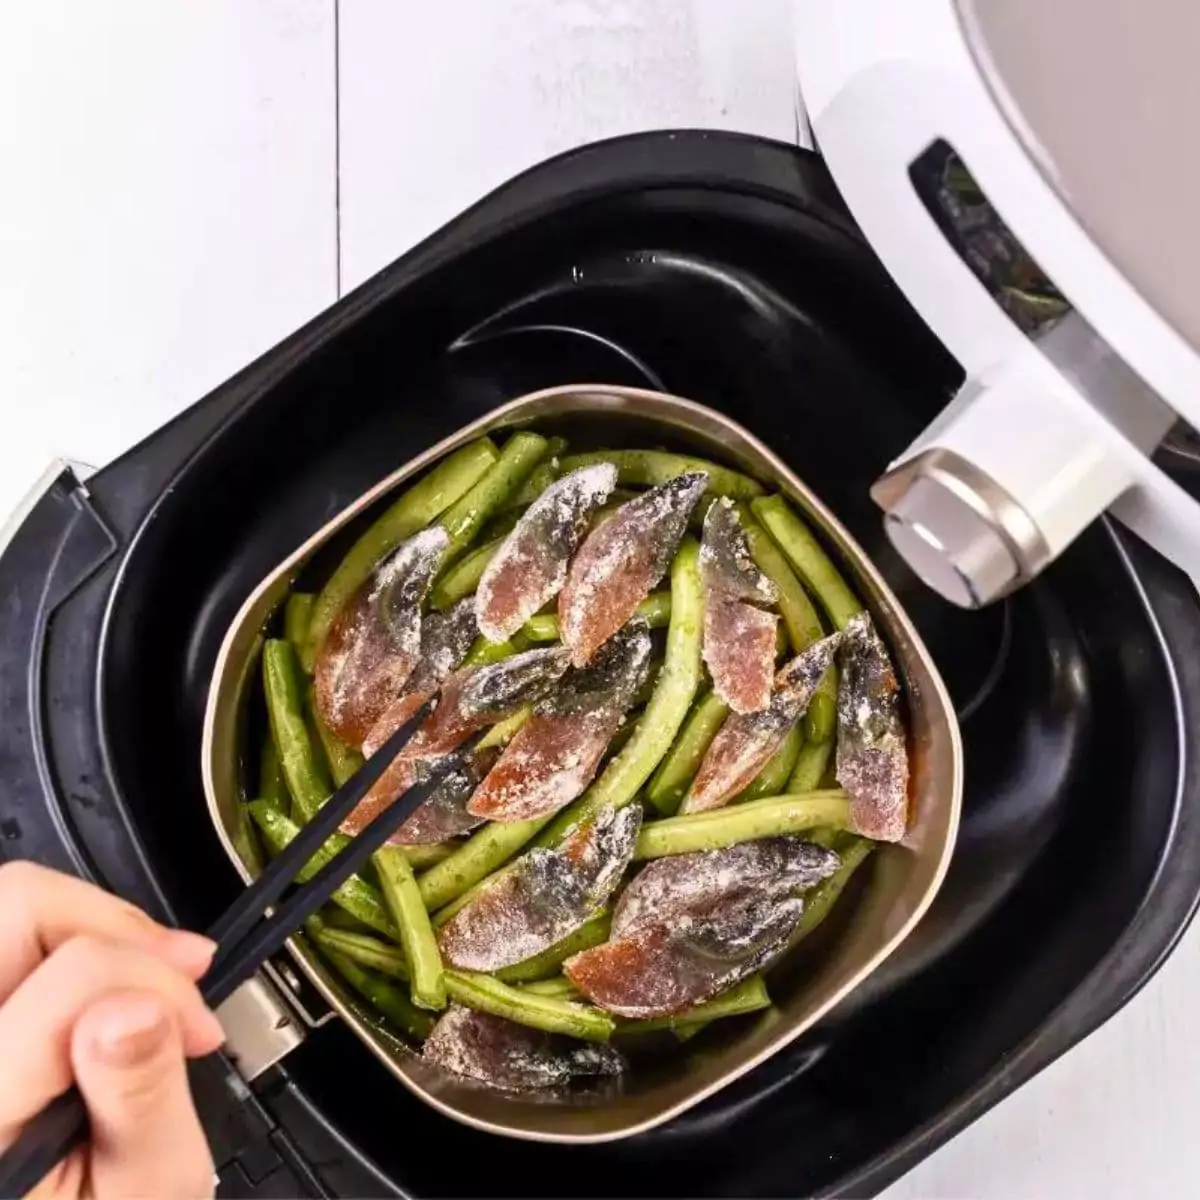 10 Best Diabetic Air Fryer Recipes You Need To Try featured image